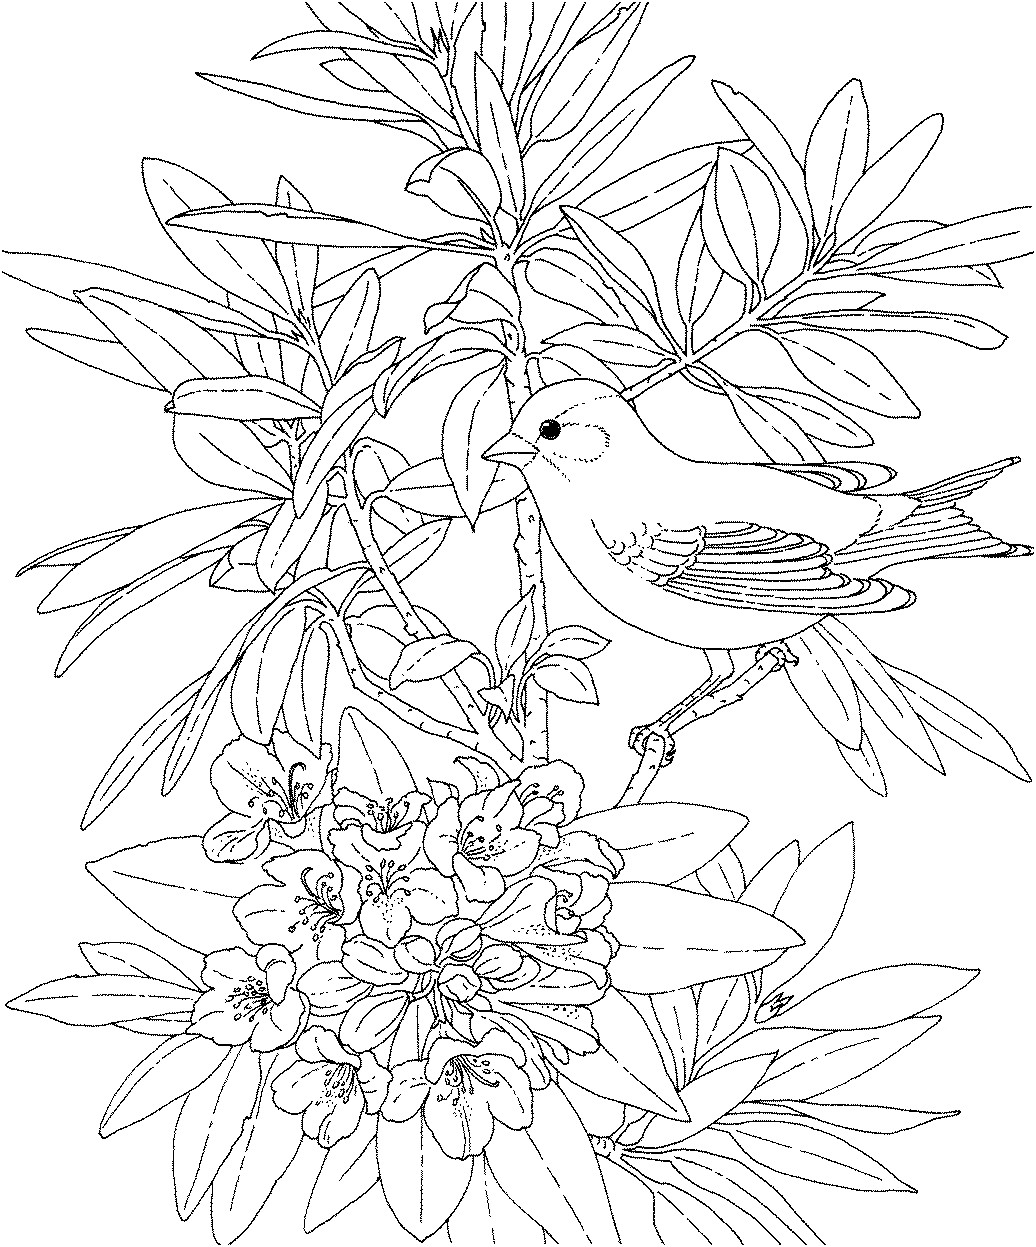 Free Printable Bird Coloring Pages
 His Heart of passion Little Winter Birds